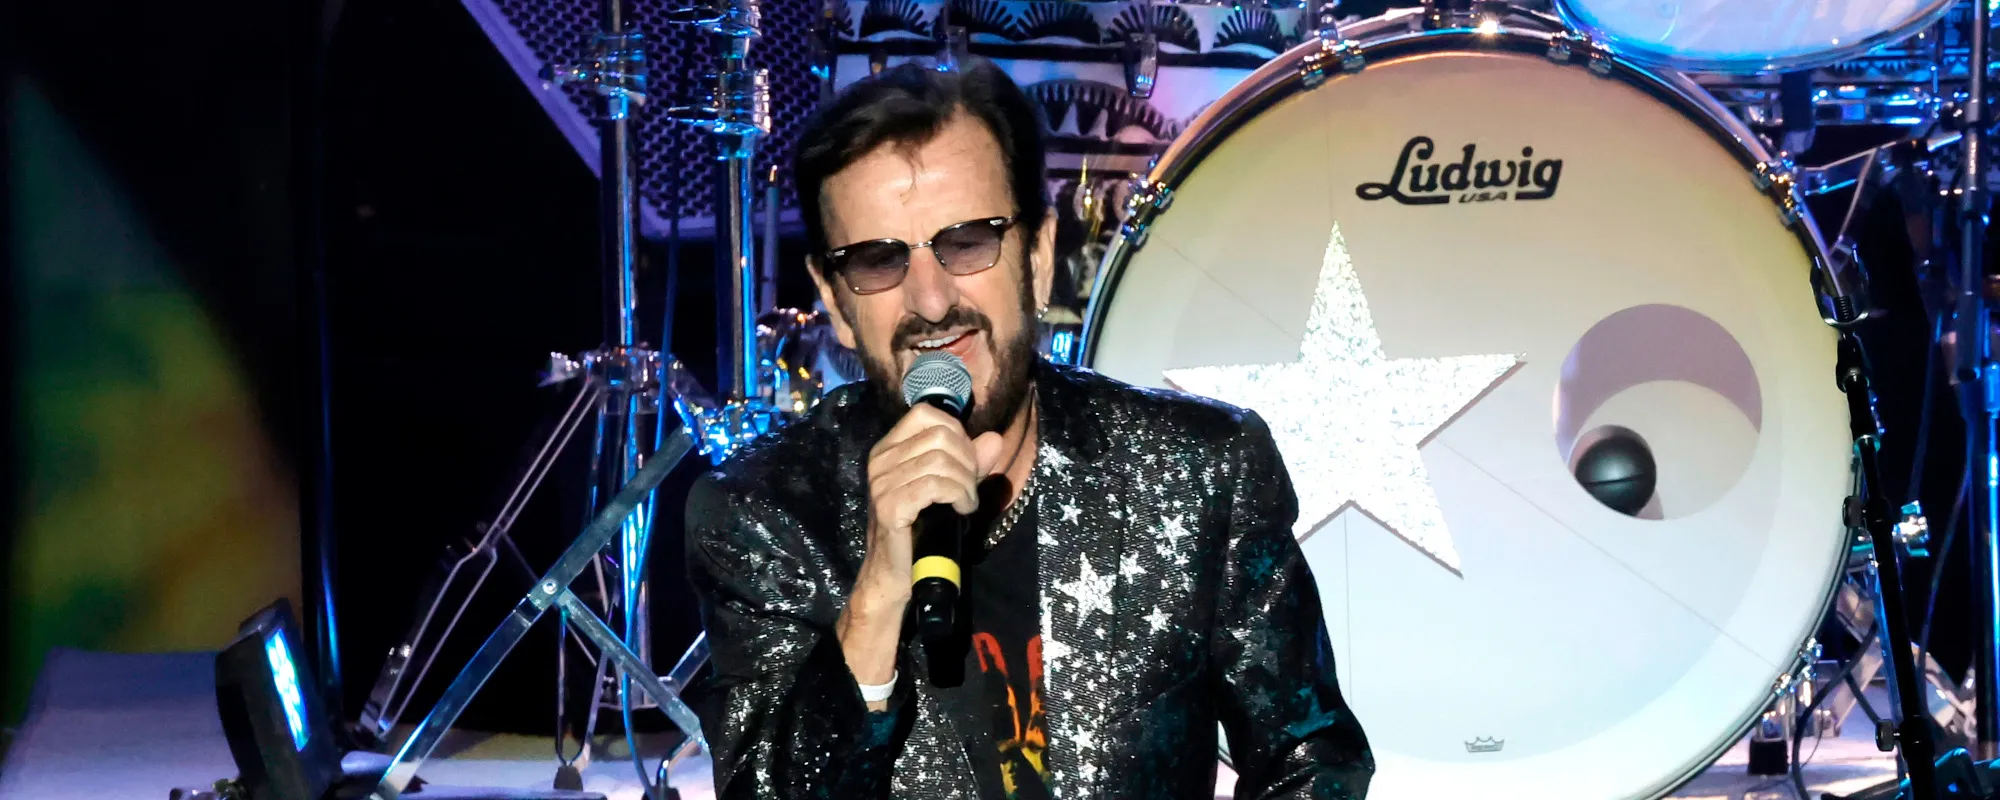 Ringo Starr’s Fourth EP ‘Rewind Forward’ Features Song by Paul McCartney